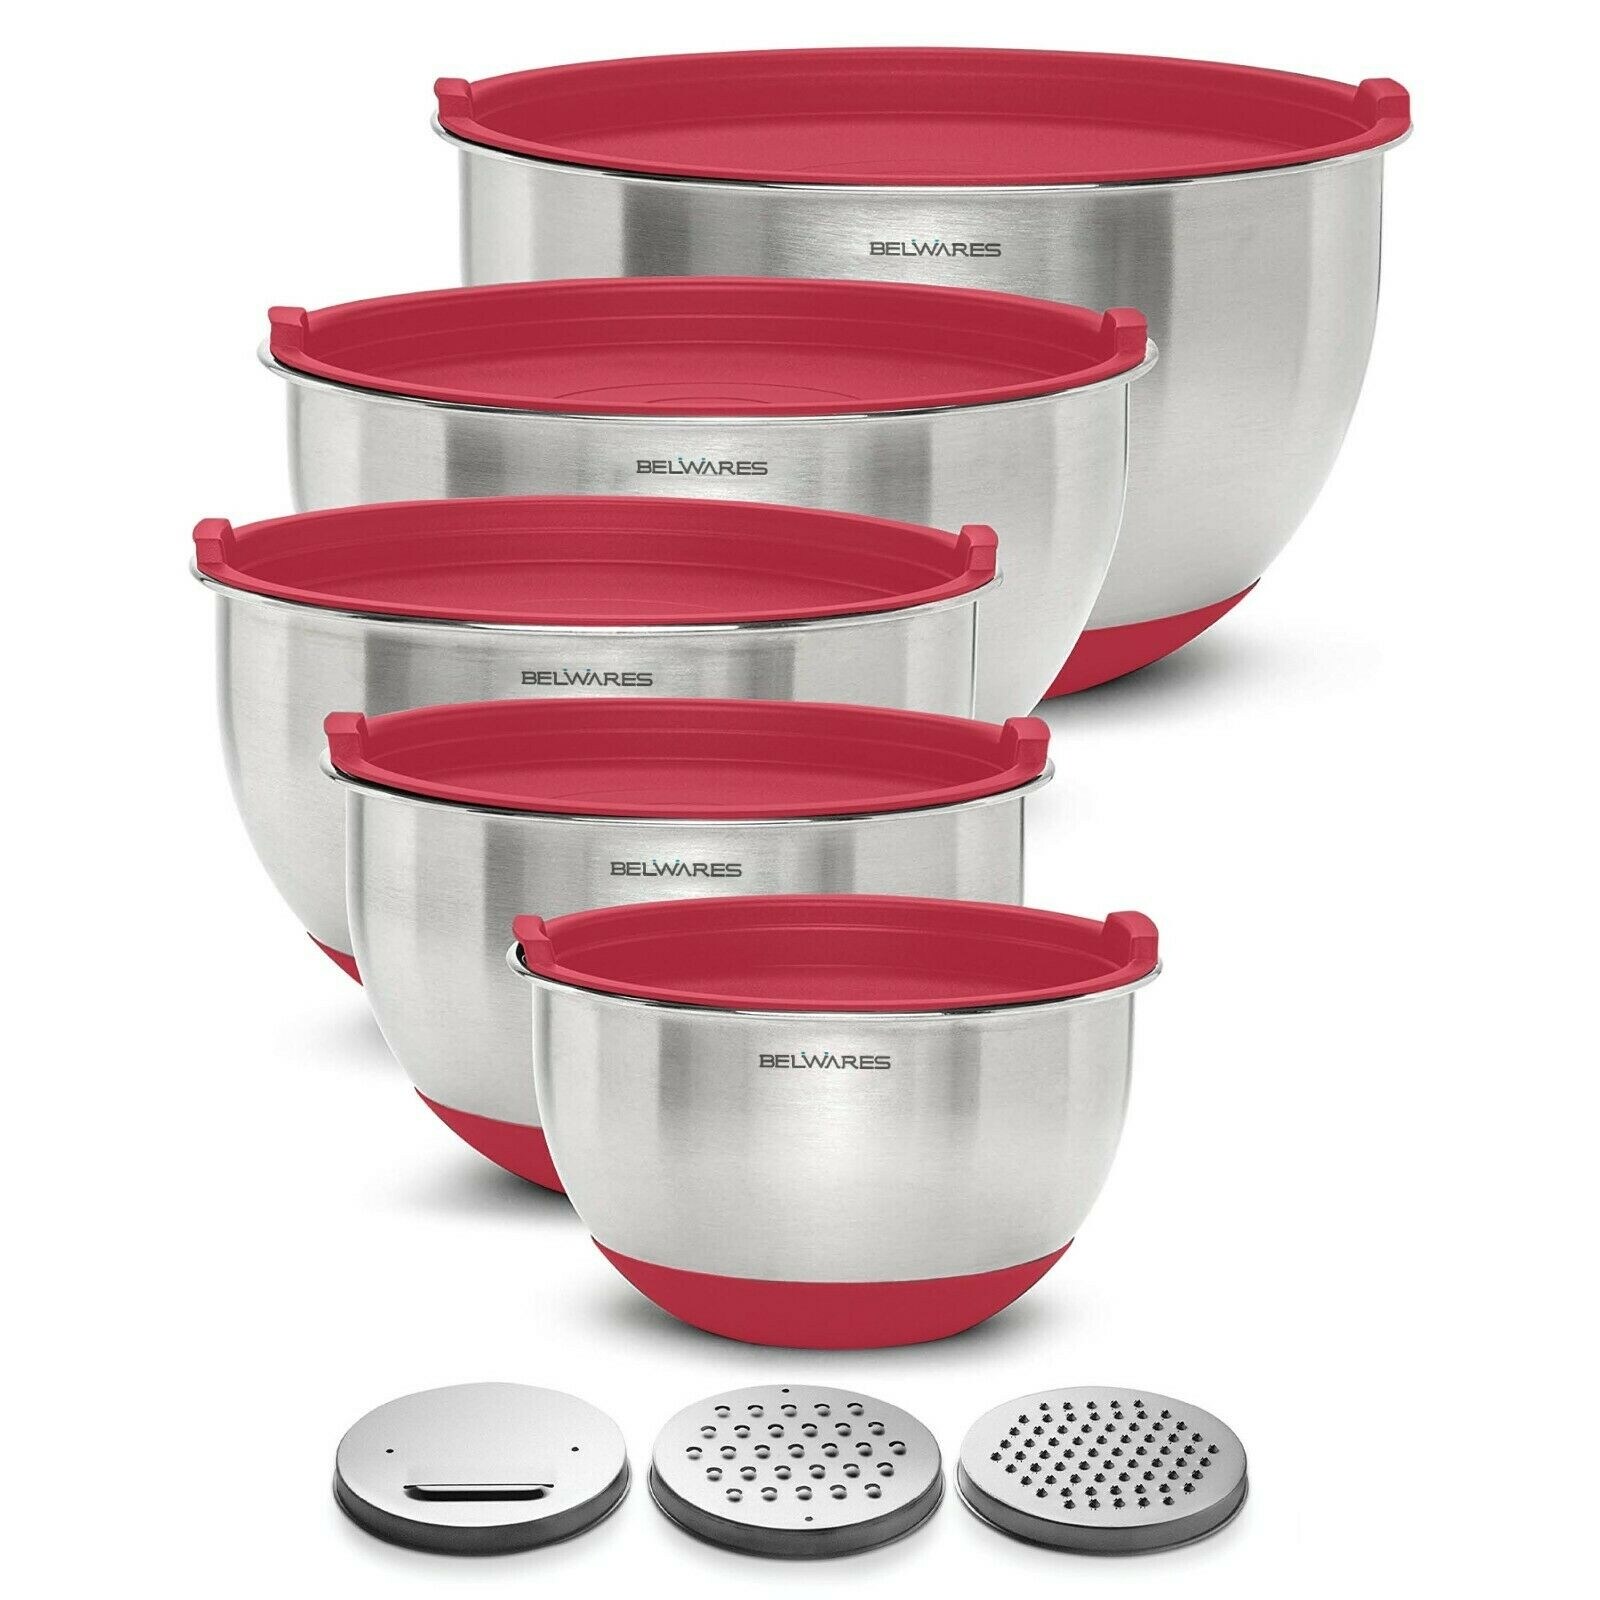 https://ak1.ostkcdn.com/images/products/is/images/direct/44eb386cb6818e98fea07b75eb9eb1696aa23b53/Belwares-Set-of-5-Stainless-Steel-Mixing-Bowls-with-Airtight-Lids-and-Graters.jpg